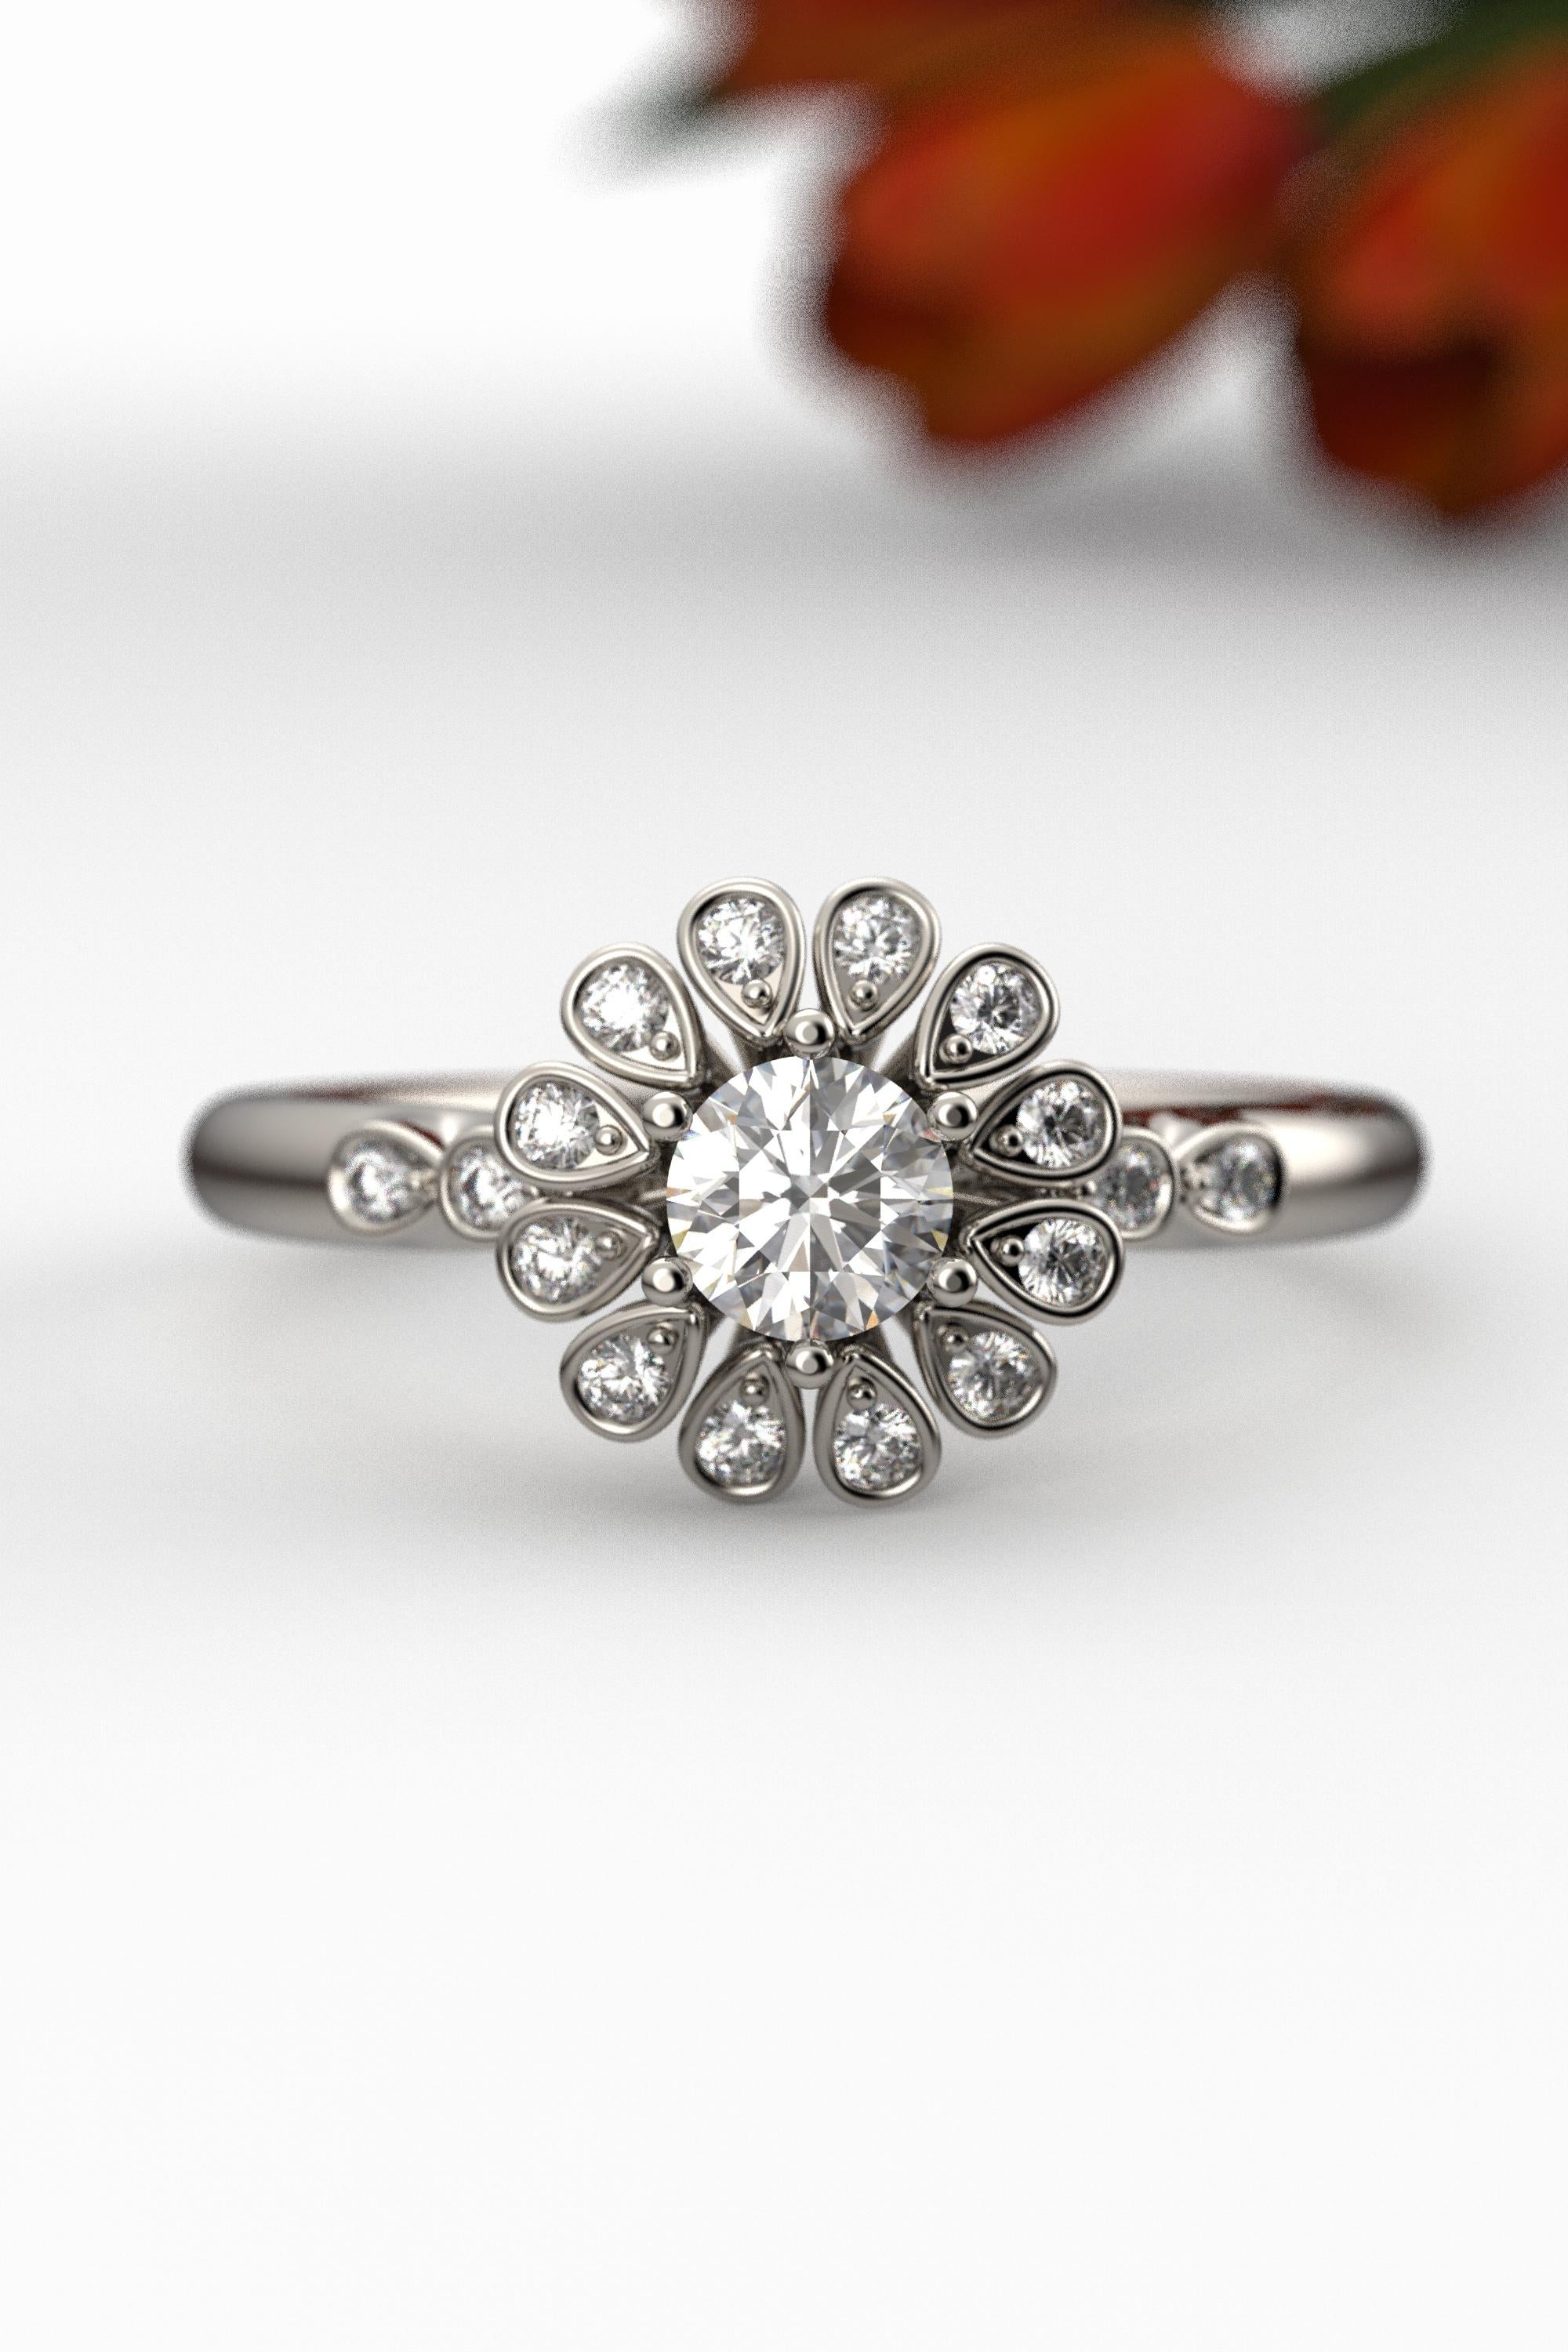 For Sale:  14k Halo Diamond Engagement Ring with 0.32 Carat GIA Certified Center Diamond 9